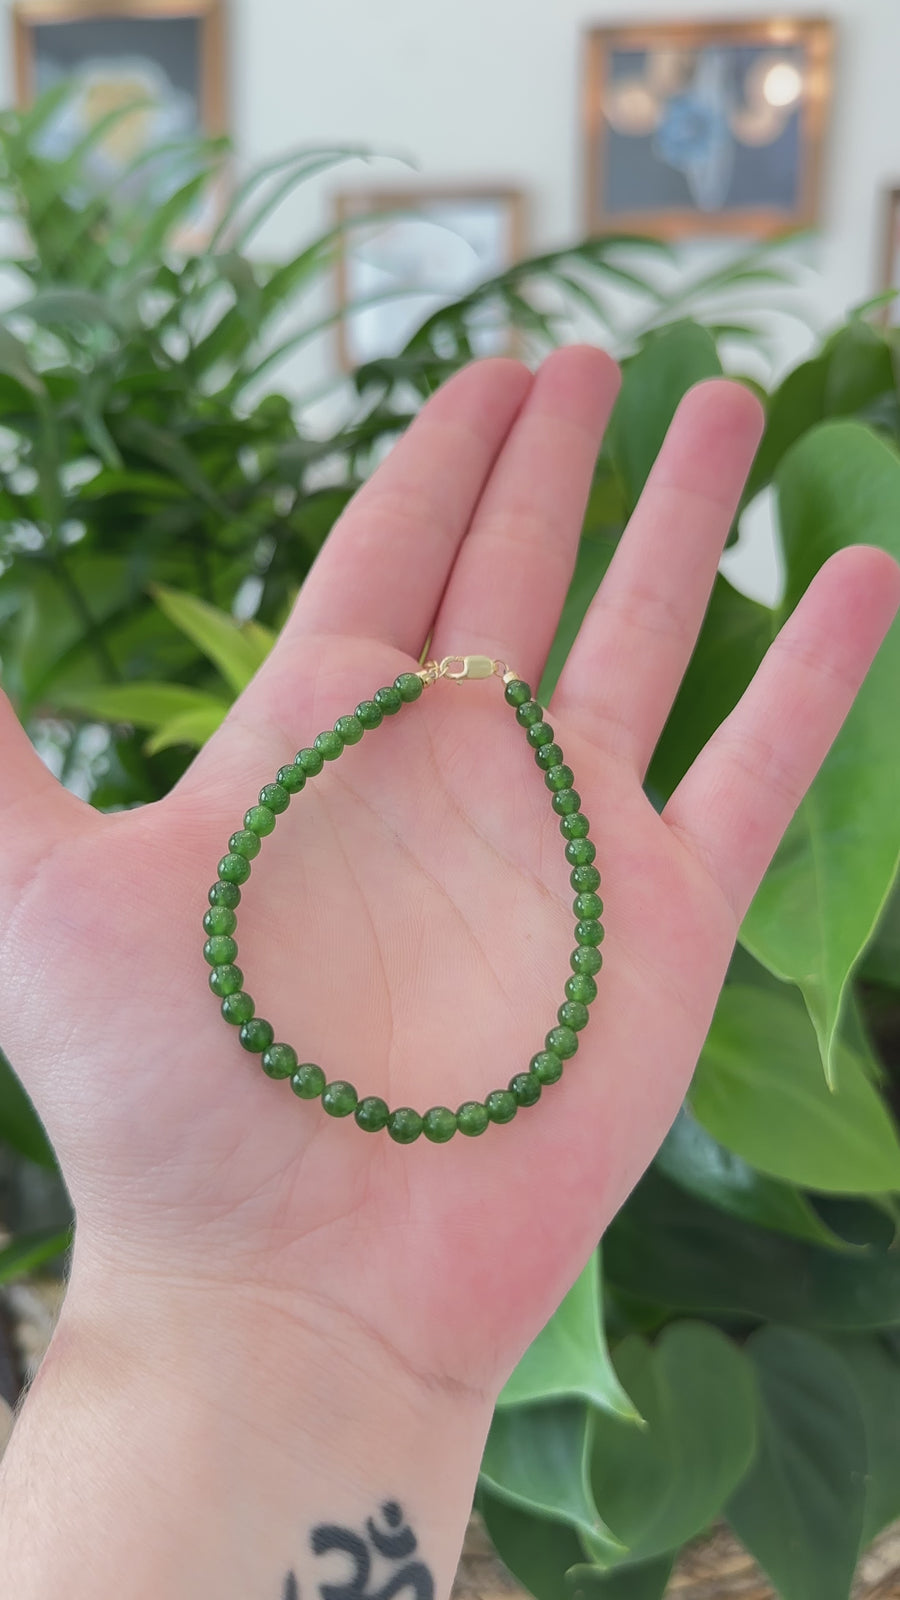 18K Yellow Gold Clasp With Genuine Green Jade Round Beads Bracelet Bangle ( 4 mm )